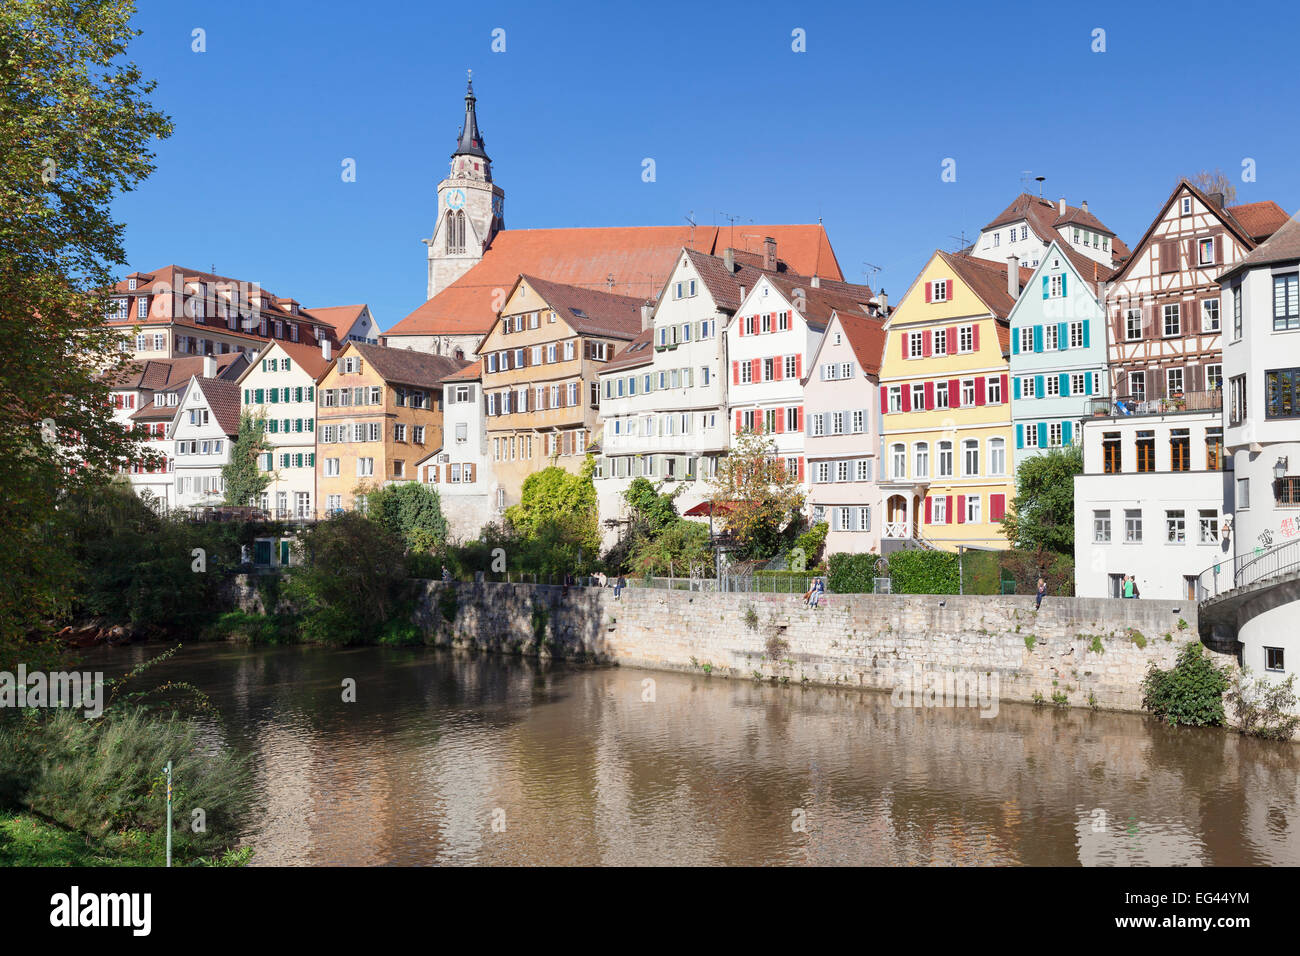 Old town with collegiate church on the Neckar river, Tubingen, Baden-Württemberg, Germany Stock Photo